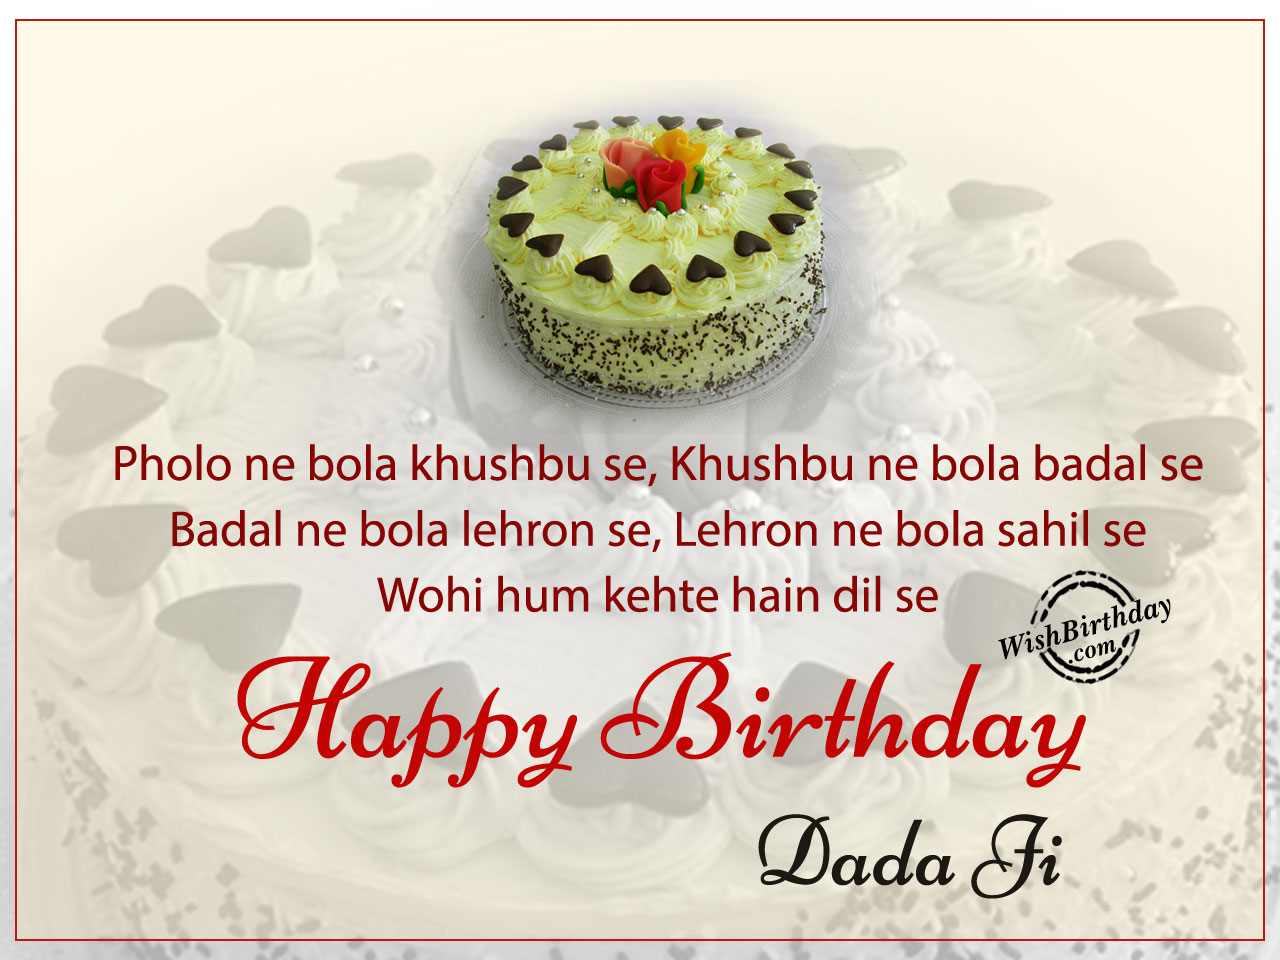 Birthday Wishes For Dada Ji - Birthday Images, Pictures